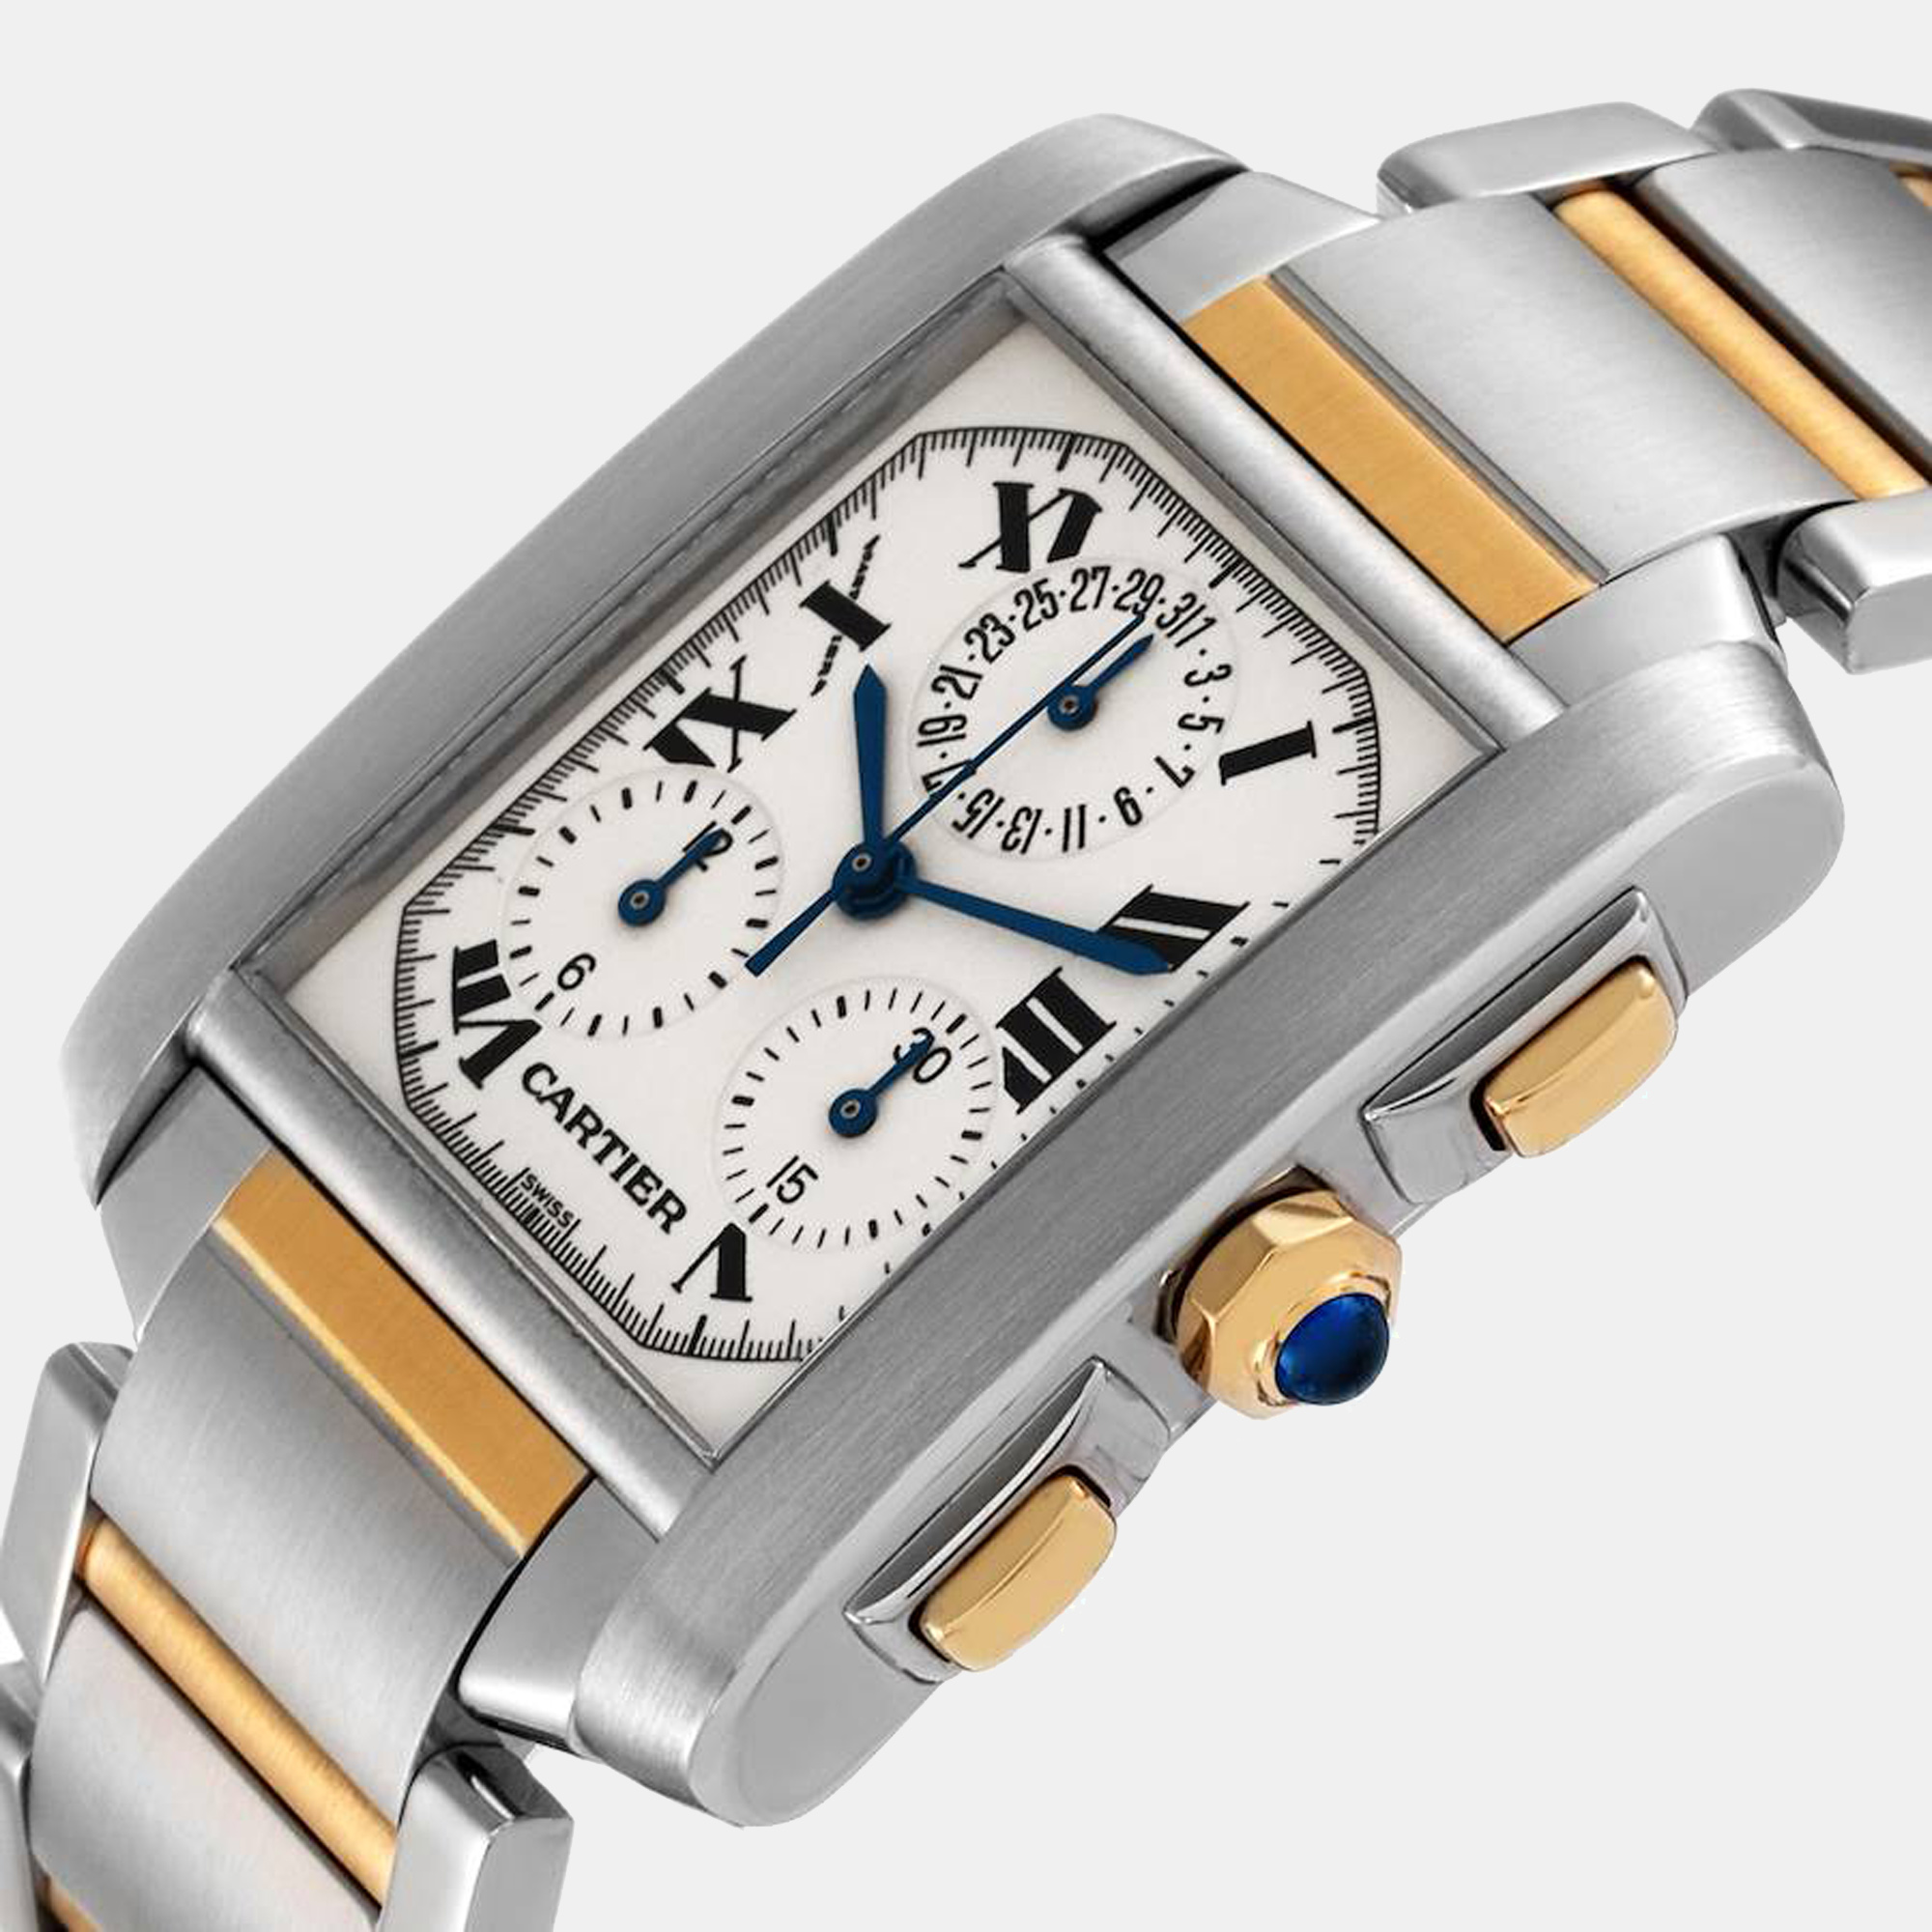 

Cartier Silver 18K Yellow Gold And Stainless Steel Tank Francaise Chronograph W51004Q4 Men's Wristwatch 37 mm